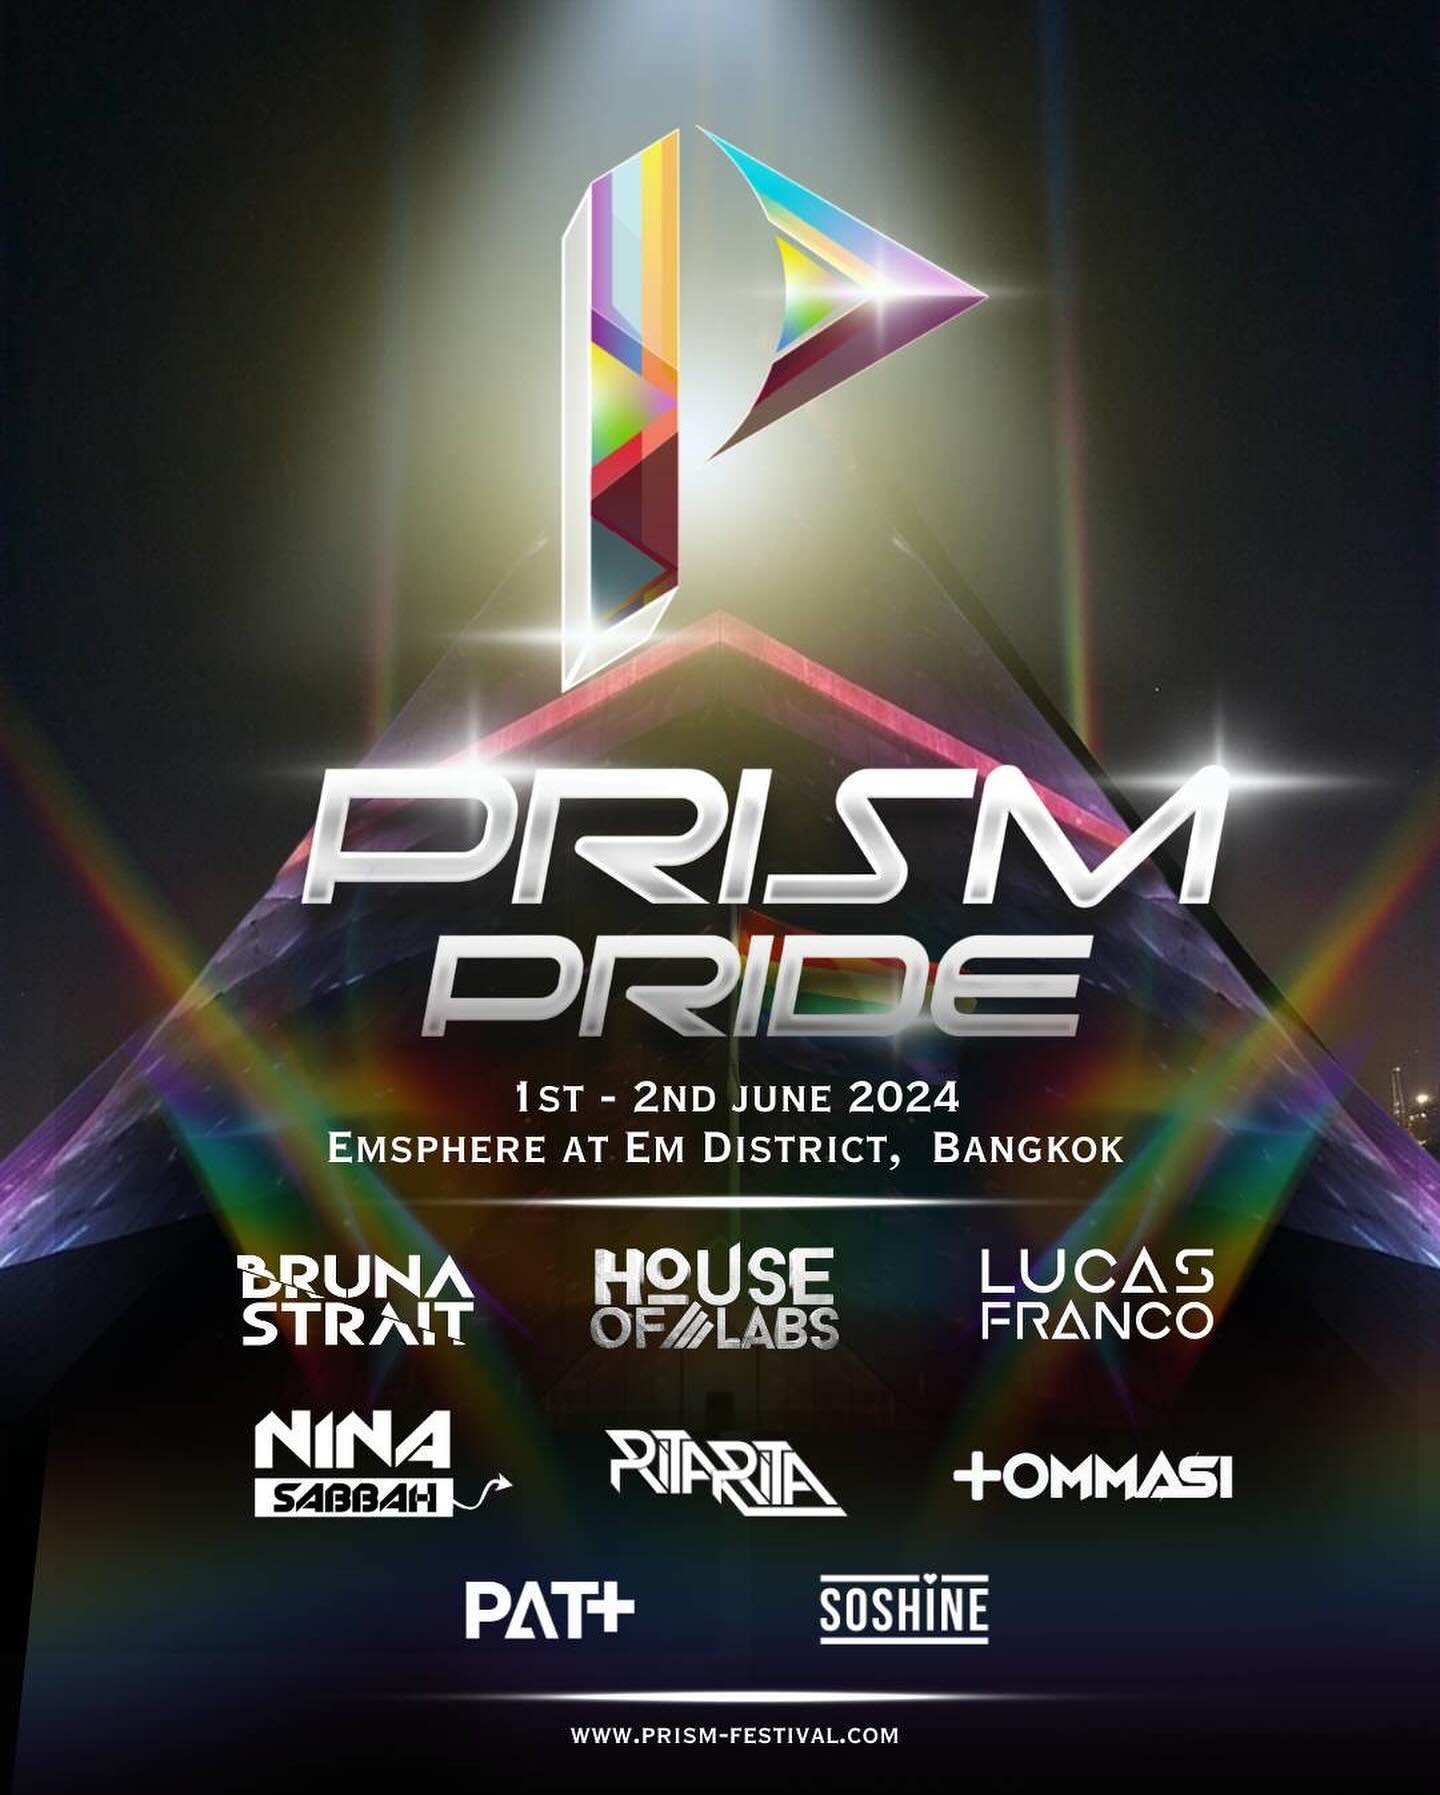 🇹🇭 PRISM PRIDE 2024 

Come join us for PRISM Festival this June 1st and 2nd. I’ll be seeing you guys again in BKK!! Let’s enjoy two hot nights together and get the pride month started!! 

Scan my QR code to get 10% discount on your tickets!
สามารถรับส่วนลด 10% ด้วย QR code ของฉันค่ะ!
私のQRコードを利用すれば10%割引されます！
掃瞄QR code購票立即享票價9折優惠！
제 포스터에 있는 QR코드로 티켓을 구매하시면 10% 할인을 받으 실 수 있습니다！

6/1-6/2 我們曼谷Gay Pride見！（跟今年潑水GC同一個場地）

Can’t wait to see you guys!! 🩶🙌🏾